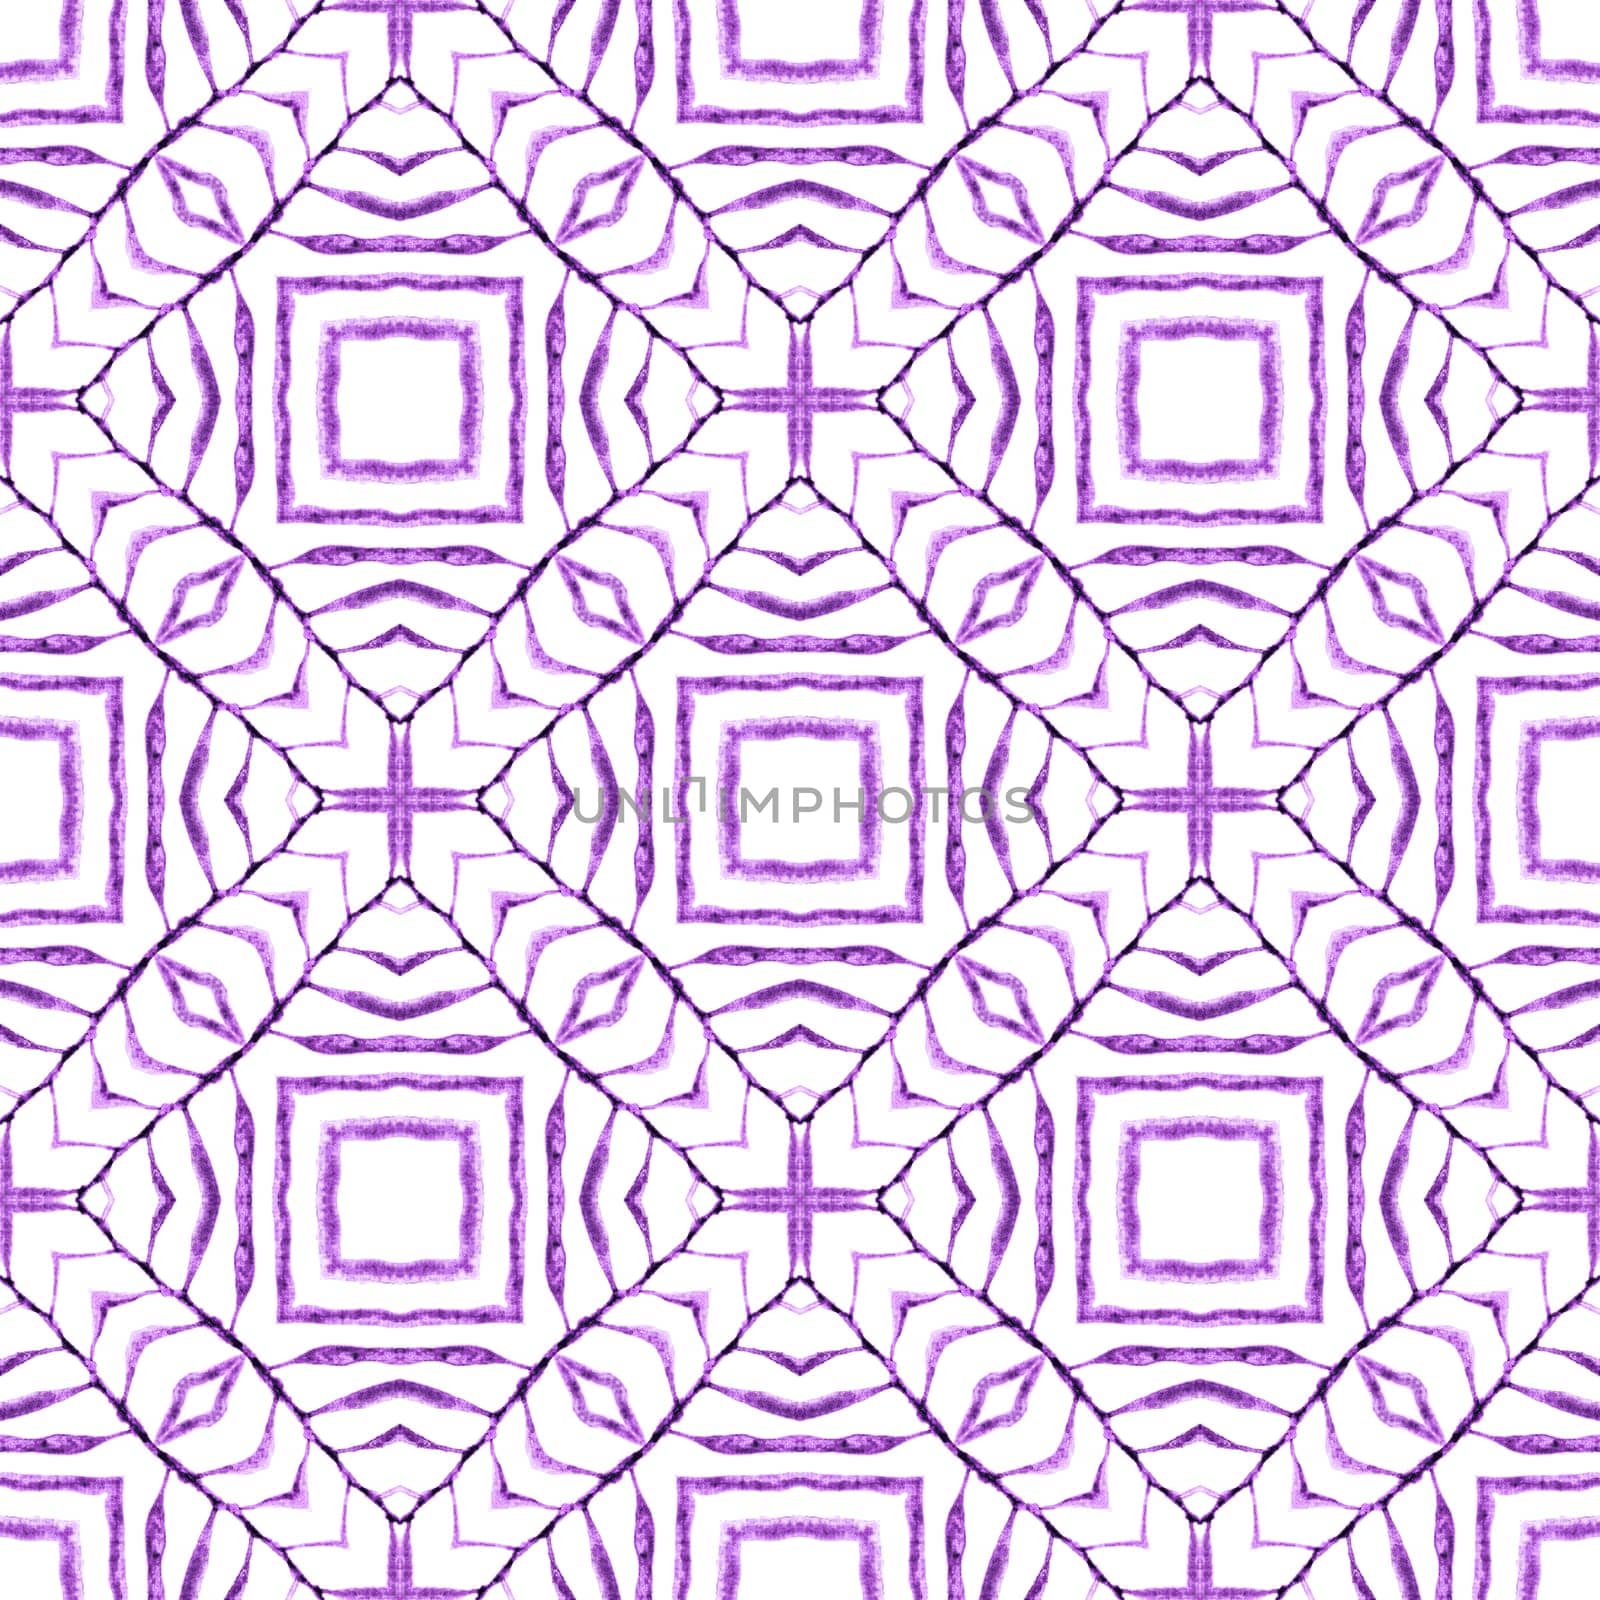 Textile ready noteworthy print, swimwear fabric, wallpaper, wrapping. Purple alive boho chic summer design. Watercolor ikat repeating tile border. Ikat repeating swimwear design.